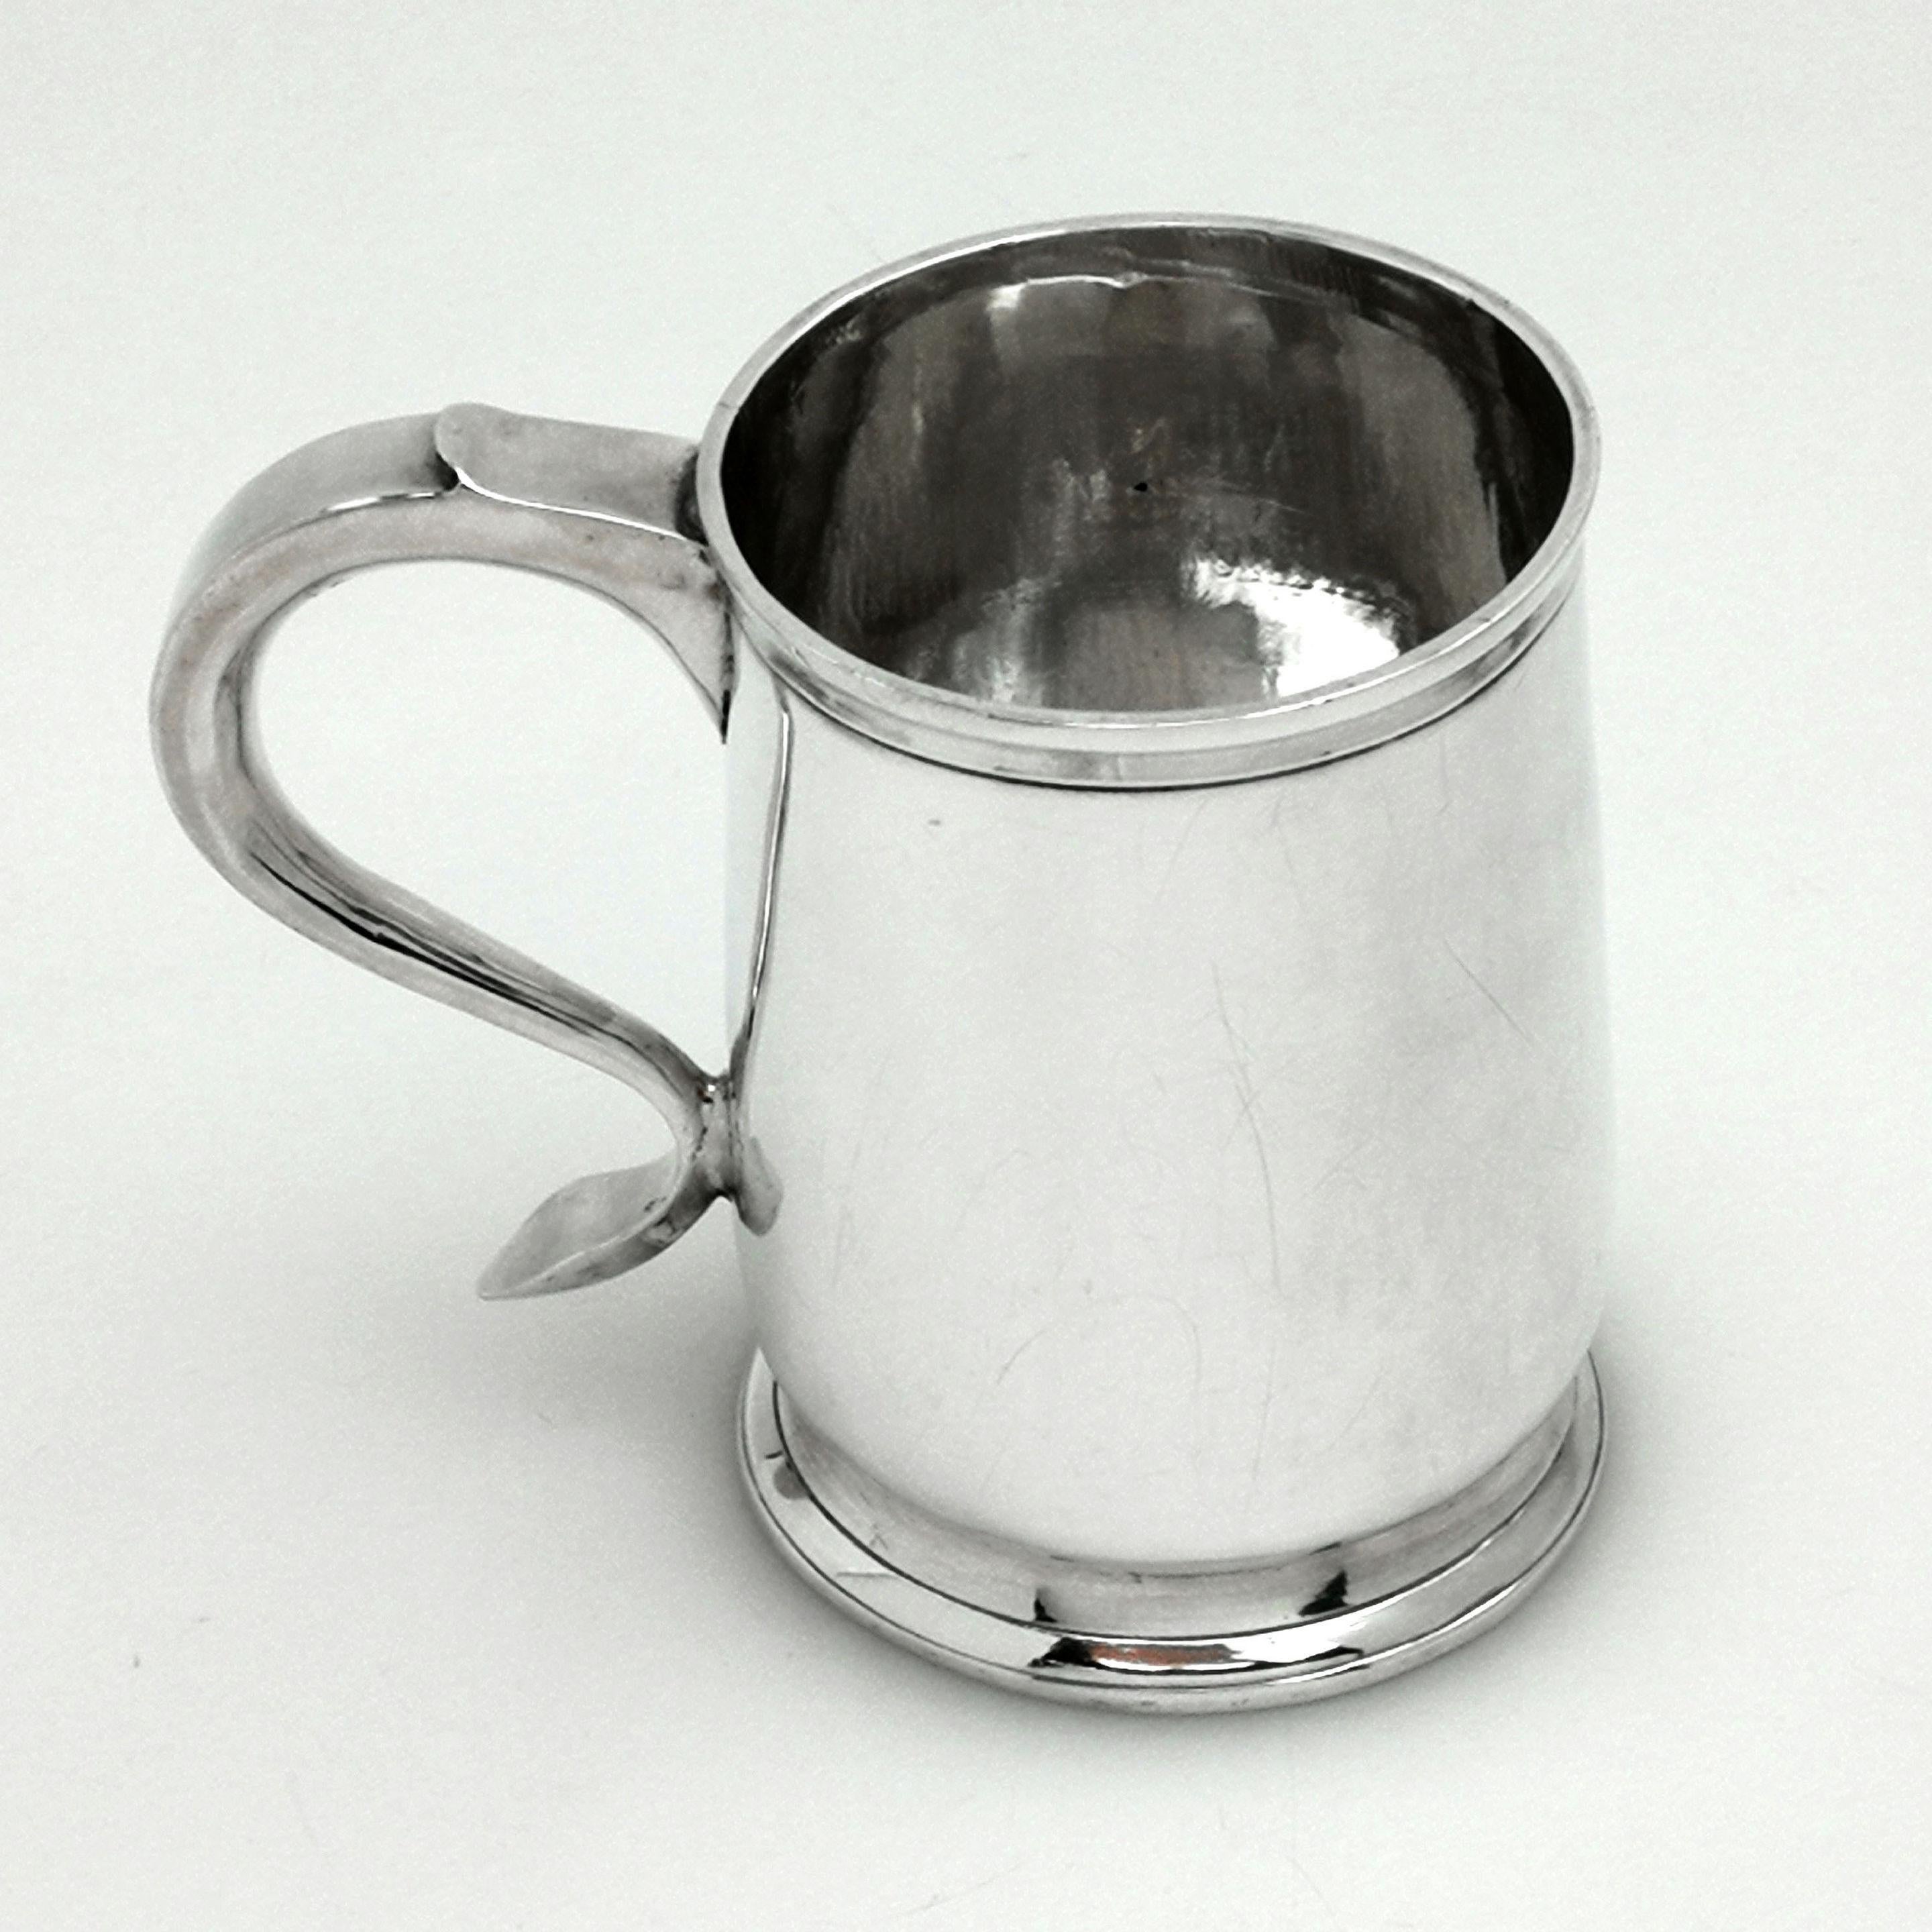 A Classic George II antique sterling silver Christening mug in a simple, elegant design so typical of the Georgian Period. The mug has a substantial scroll handle and stands on a spread foot. It is otherwise unembellished and features a polished